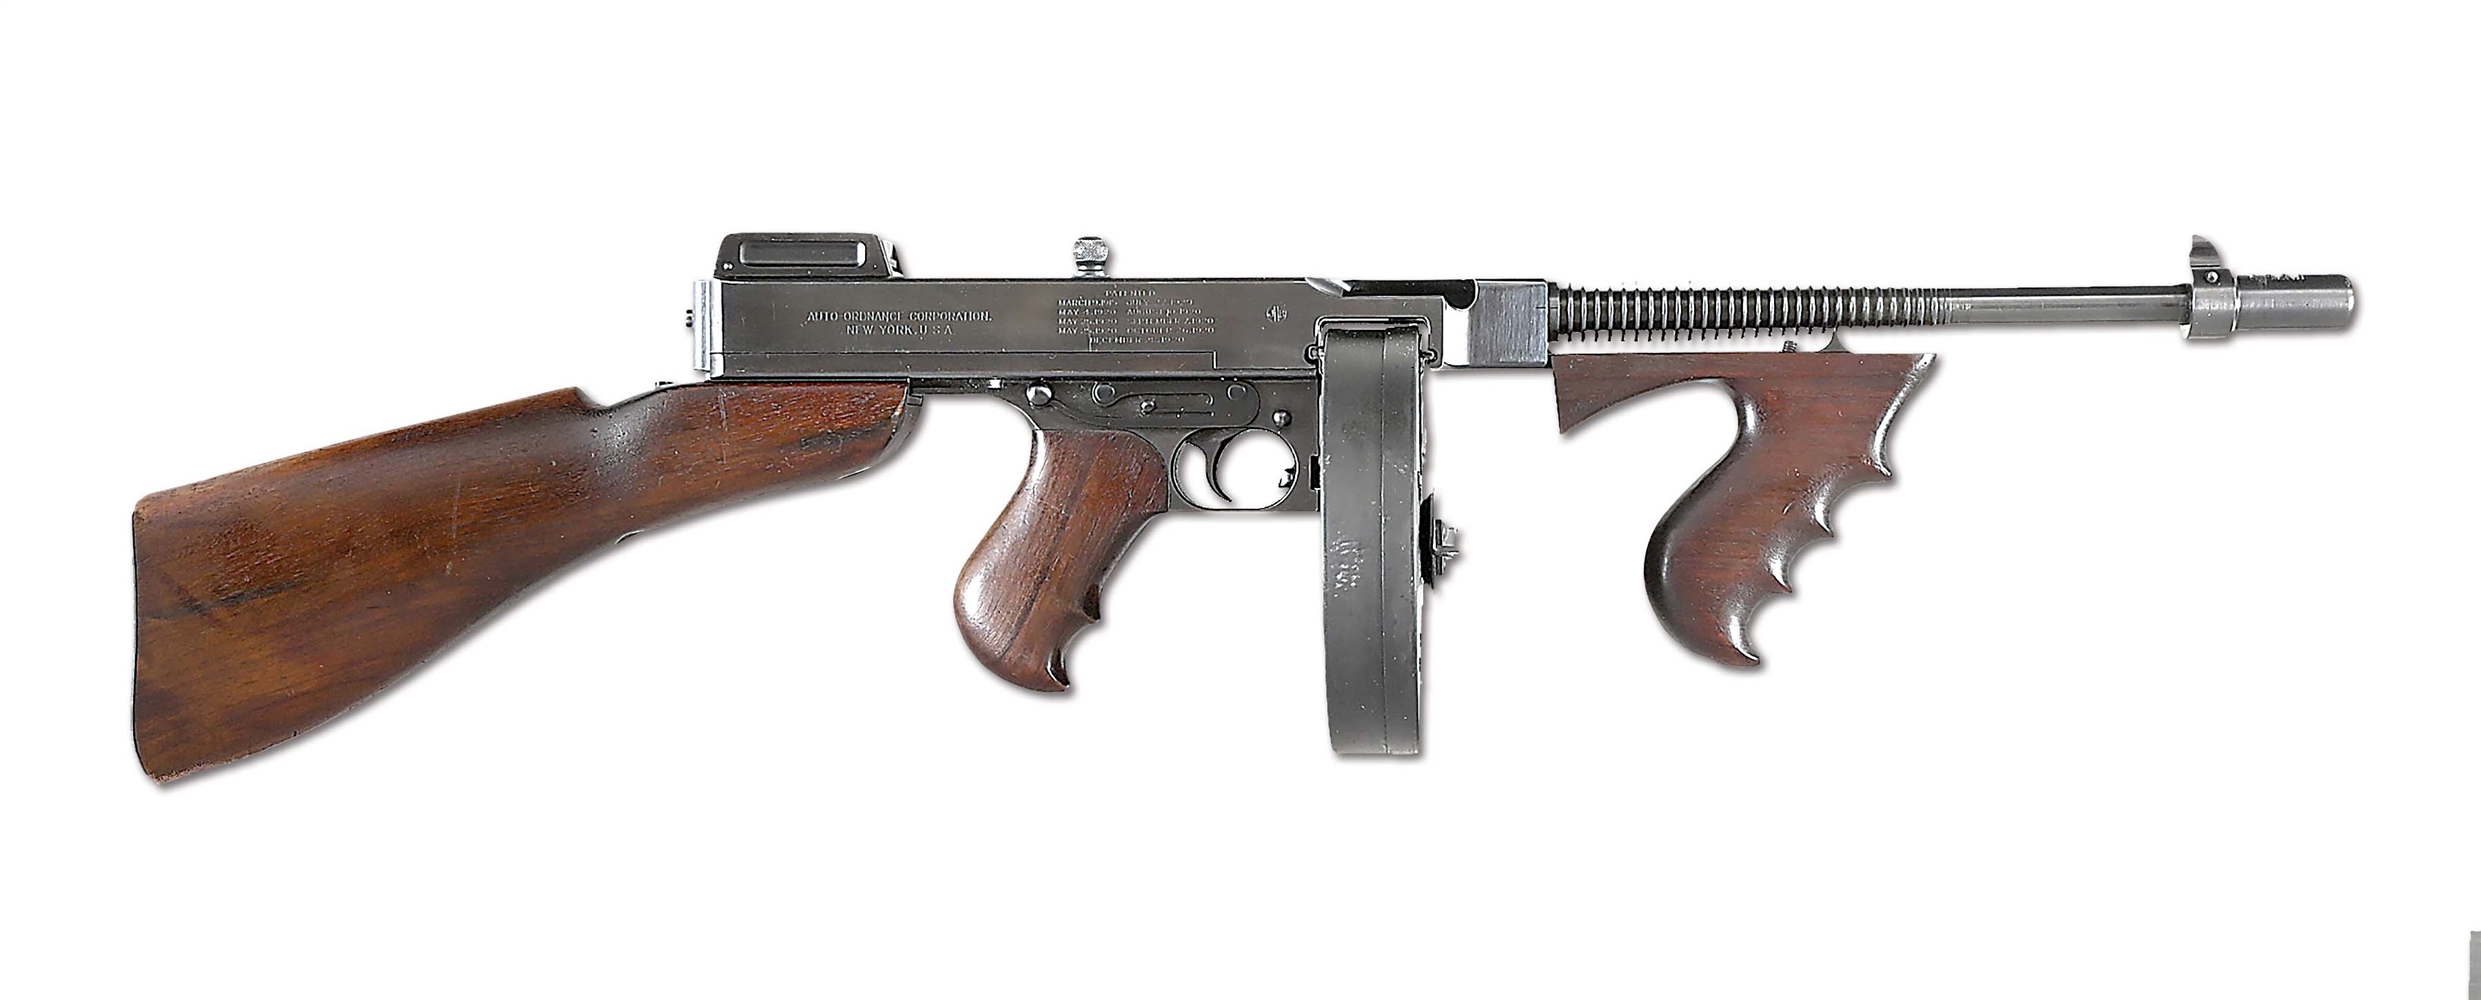 (N) UTTERLY SPECTACULAR ORIGINAL CONDITION COLT 1921/28 NAVY THOMPSON MACHINE GUN (CURIO AND RELIC).